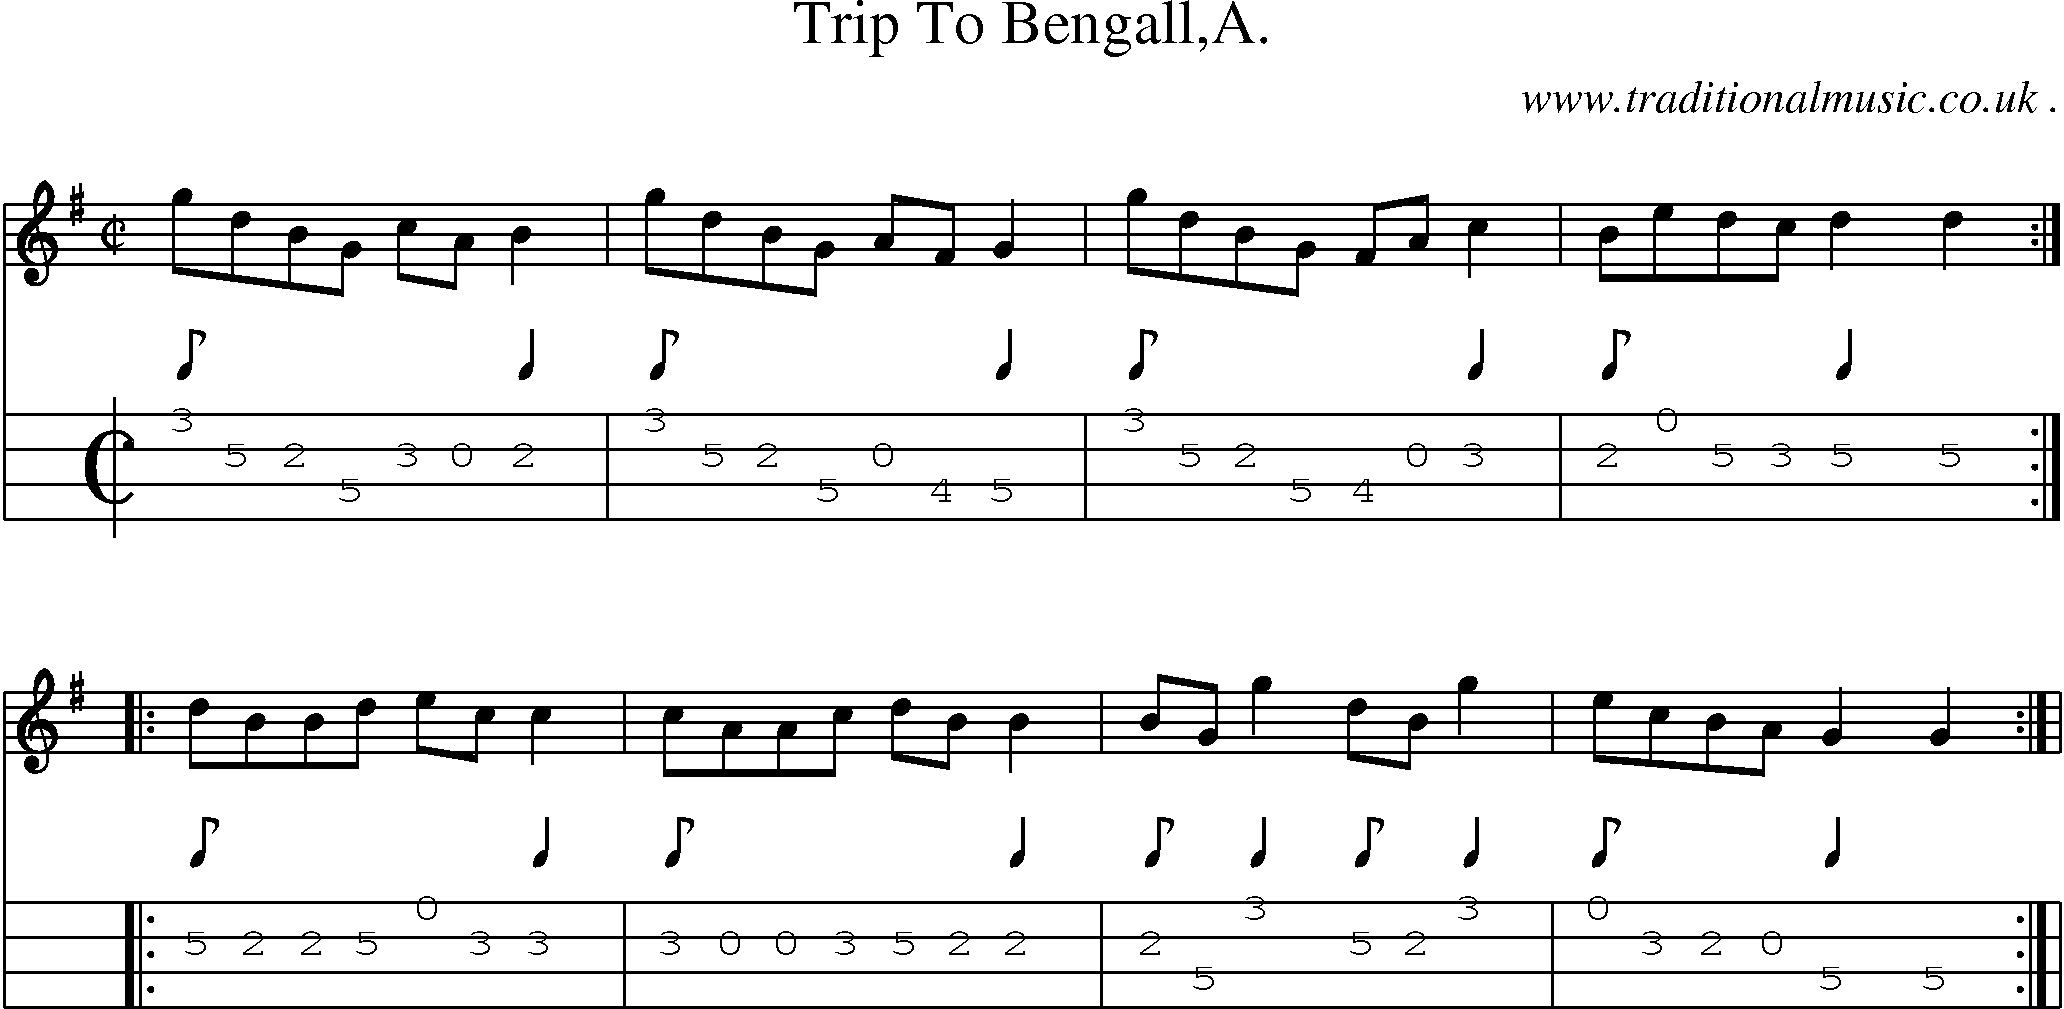 Sheet-Music and Mandolin Tabs for Trip To Bengalla